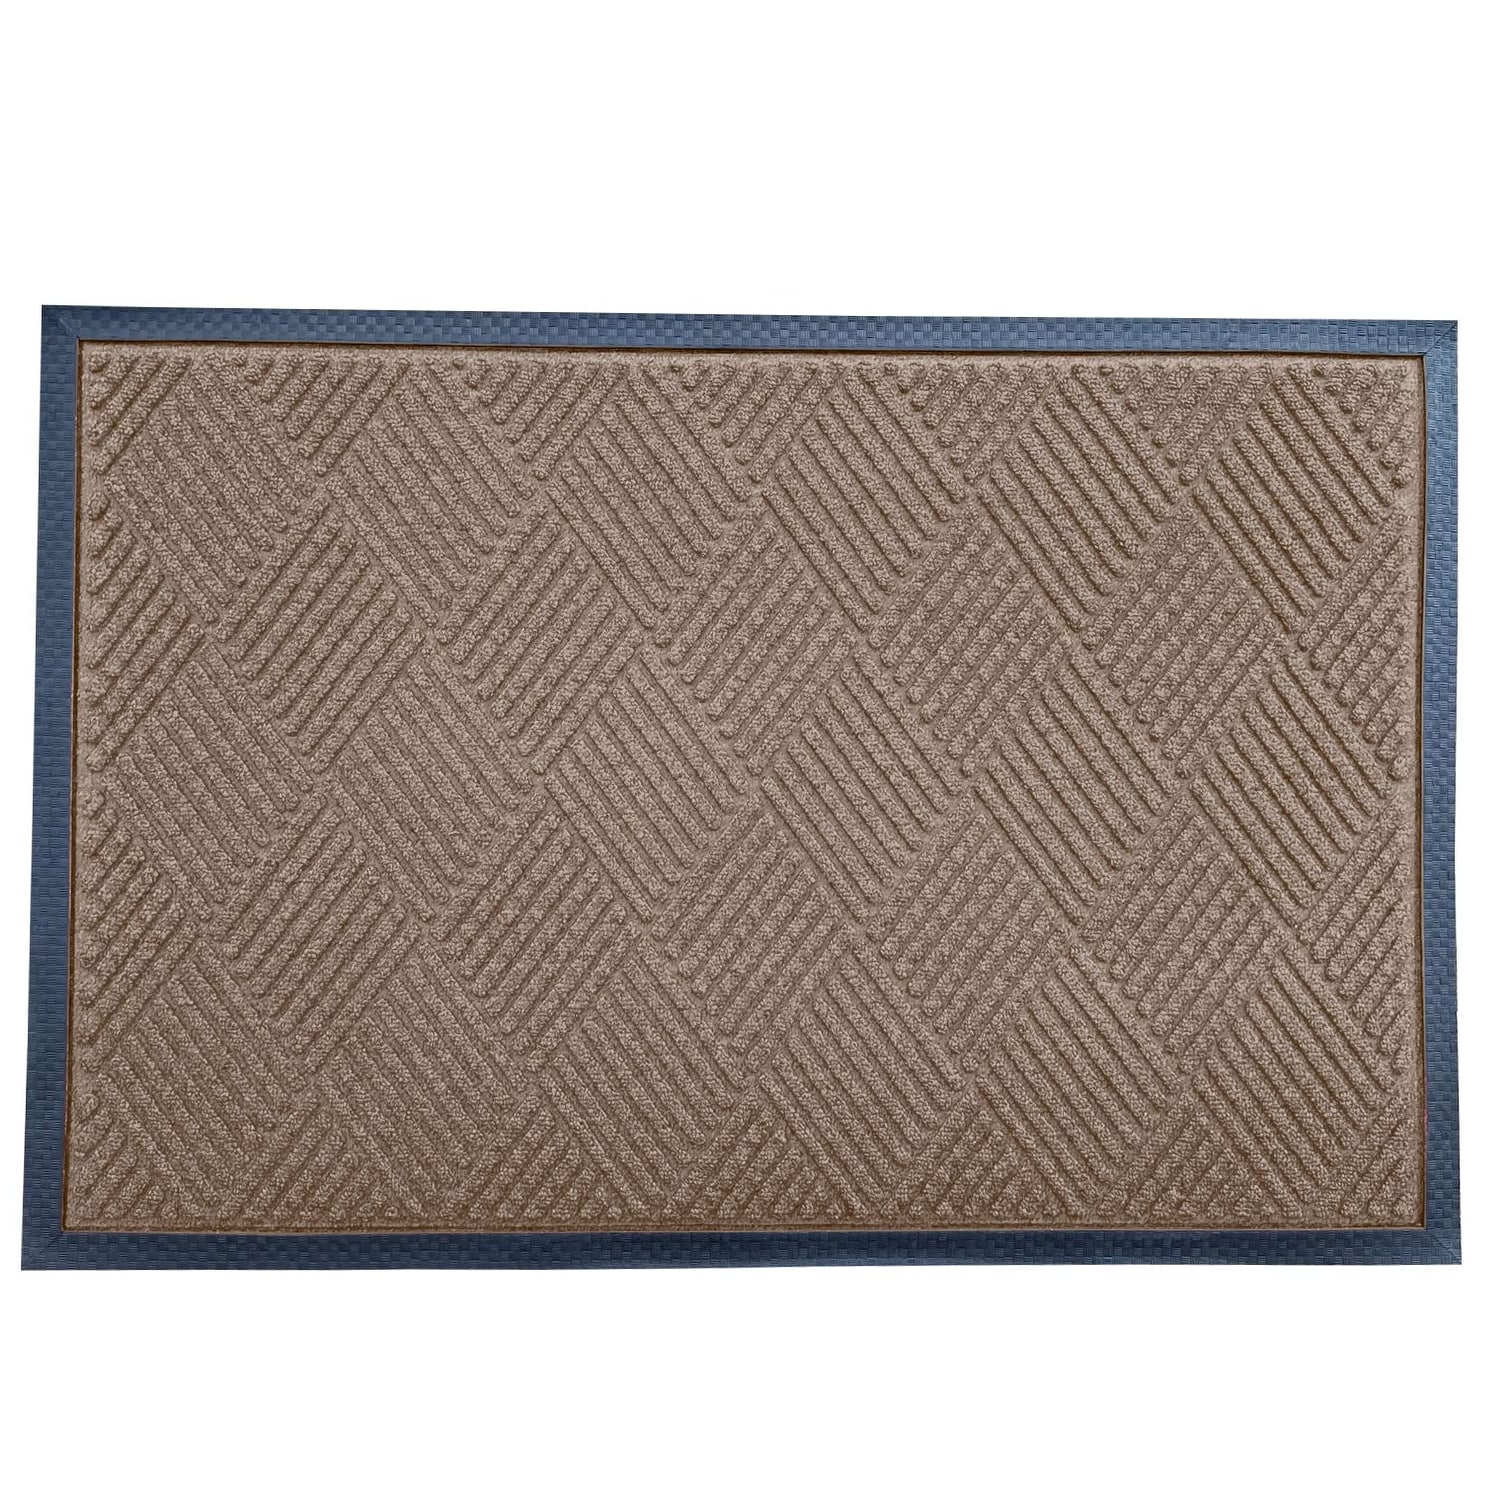 https://ak1.ostkcdn.com/images/products/is/images/direct/caa4067c04f1b7c52f8b112983e486ac626216cf/Envelor-Door-Mat-Indoor-Outdoor-Low-Profile-Commercial-Entryway-Rug.jpg